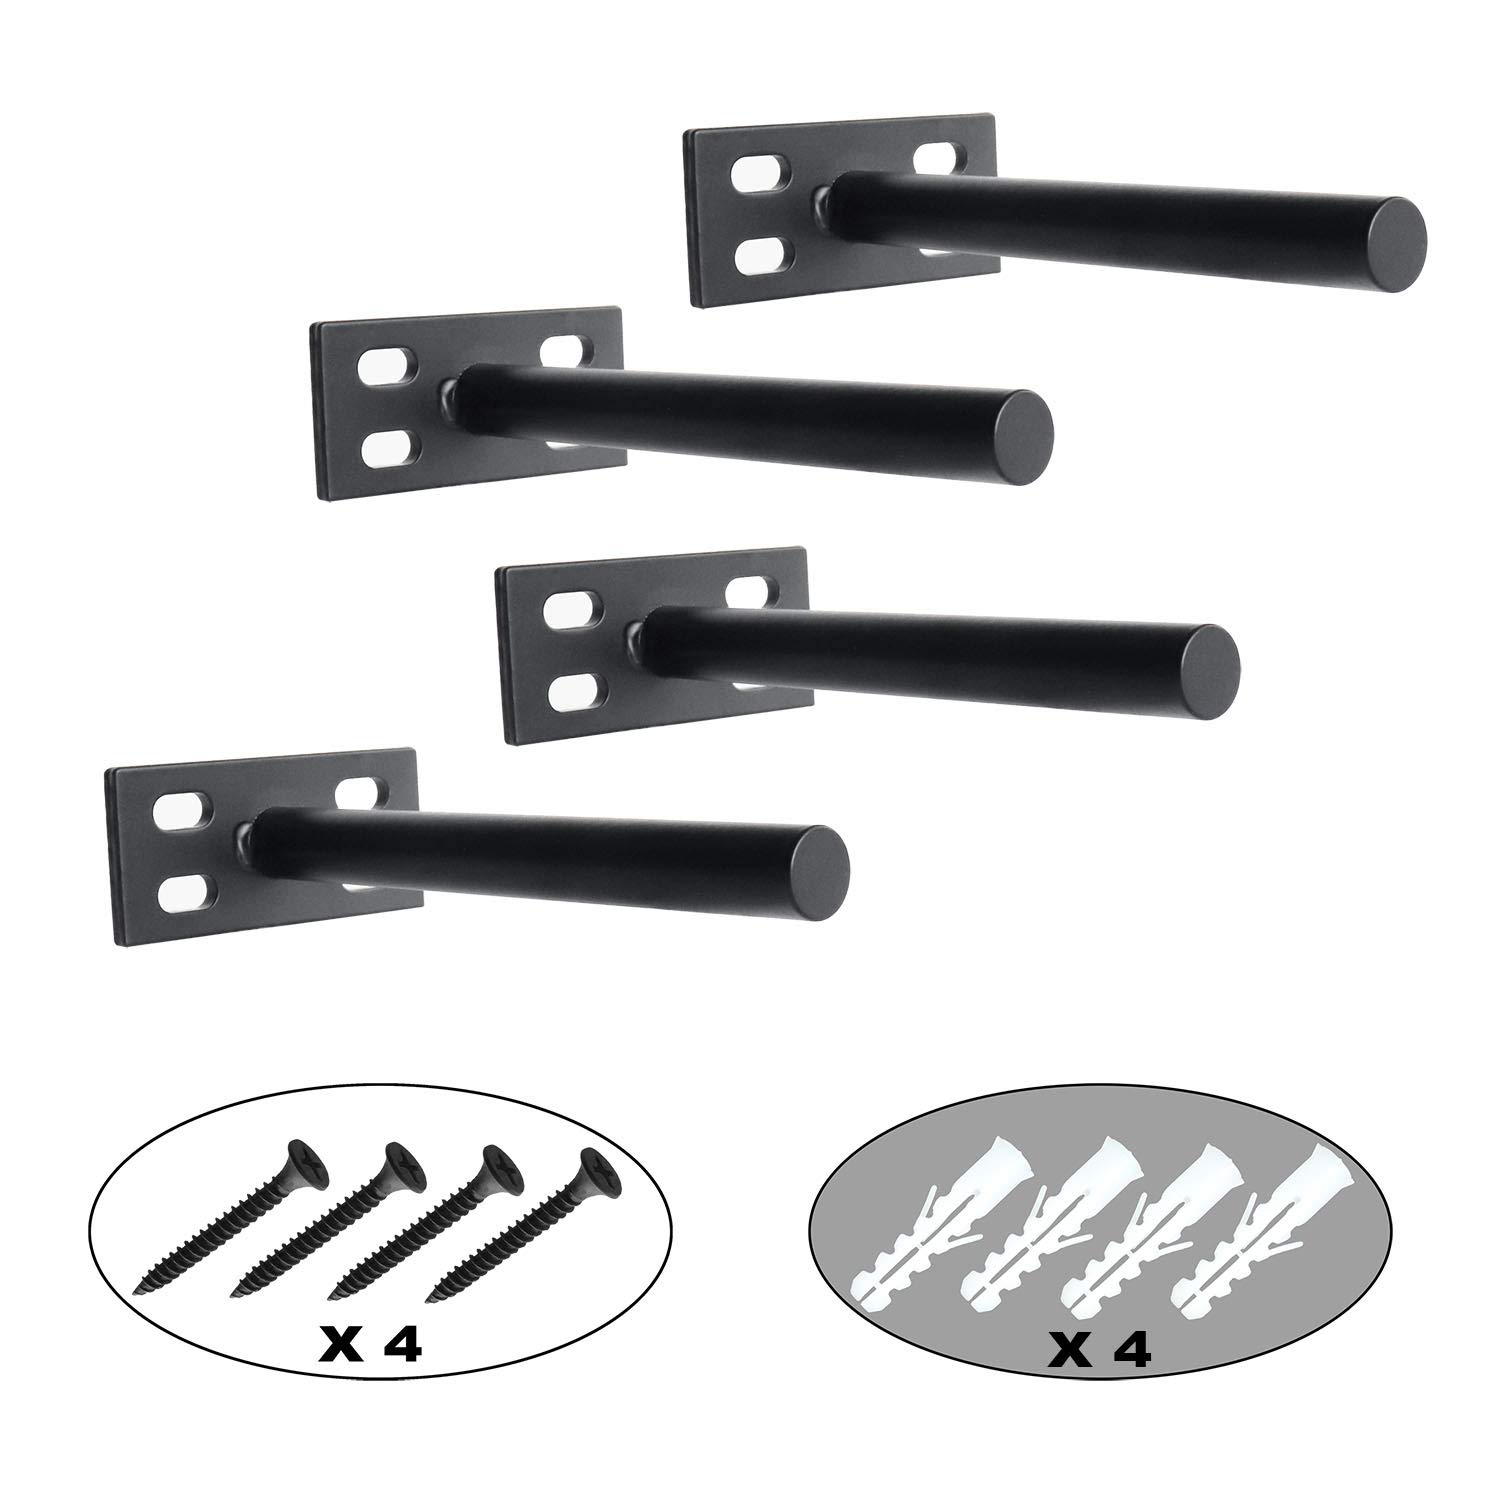 floating shelf brackets solid steel blind supports for home wall diy heavy duty inch hardware kit easy mounting wood glass support pegs decorative mounted coat racks drywall hooks